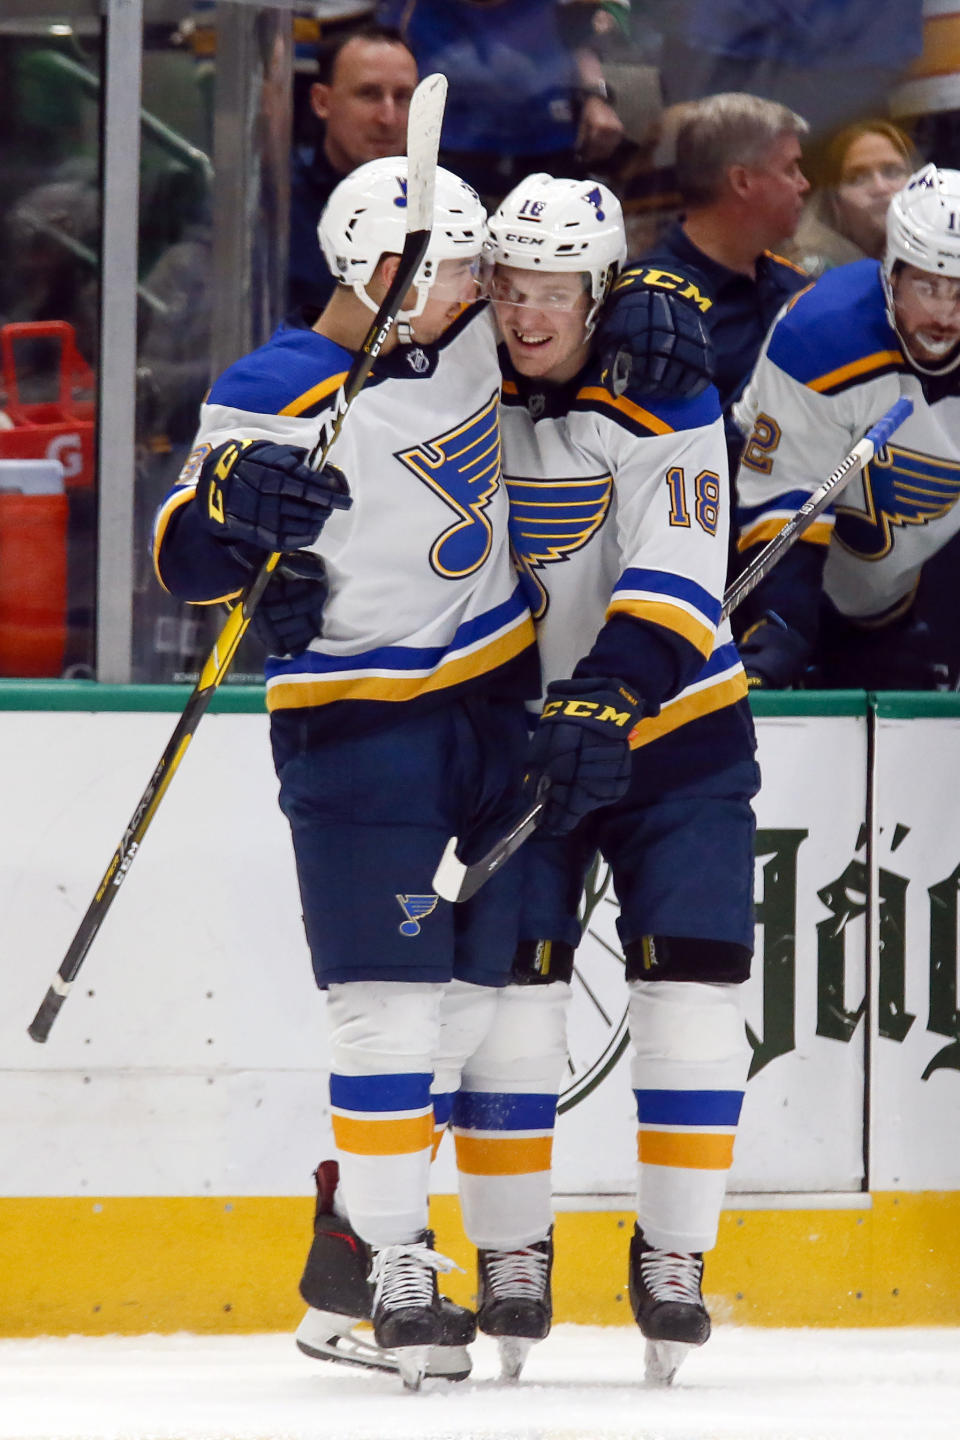 St. Louis Blues center Jordan Kyrou, left, hugs center Robert Thomas after Kyrou scored a goal against the Dallas Stars during the second period of an NHL hockey game in Dallas, Friday, Feb. 21, 2020. (AP Photo/Ray Carlin)